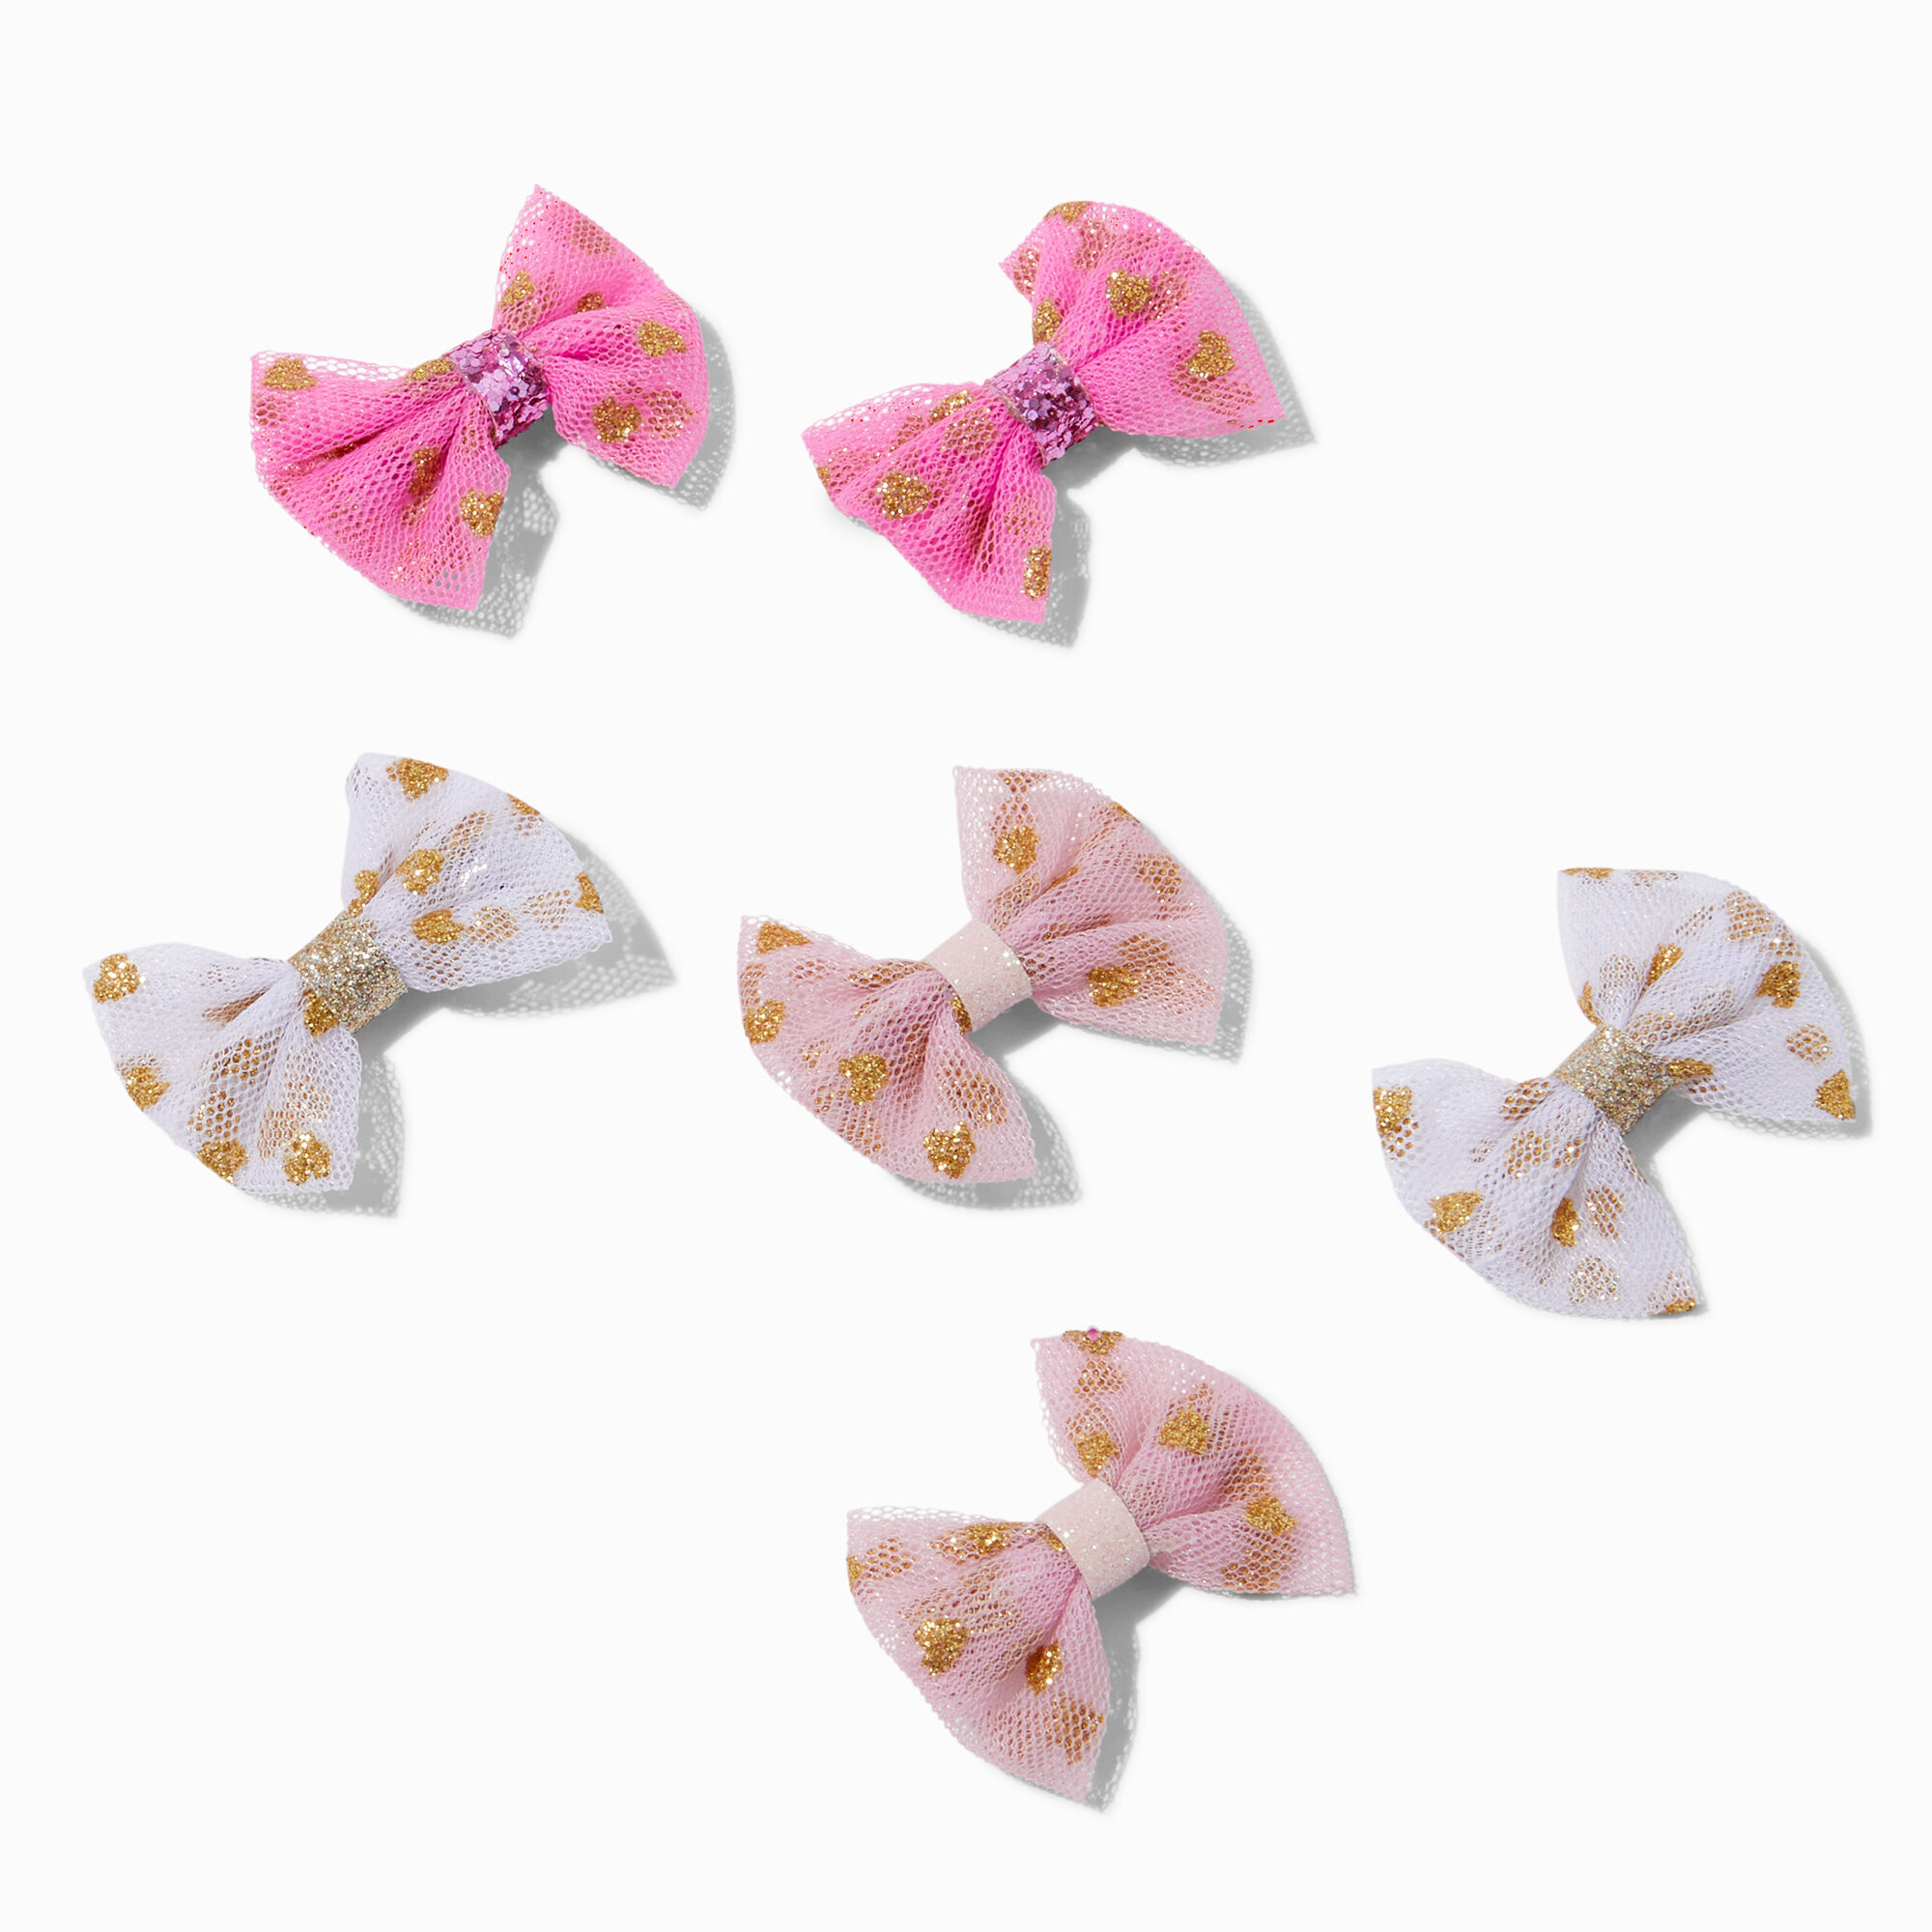 View Claires Club Glitter Mesh Hair Bow Clips 6 Pack information